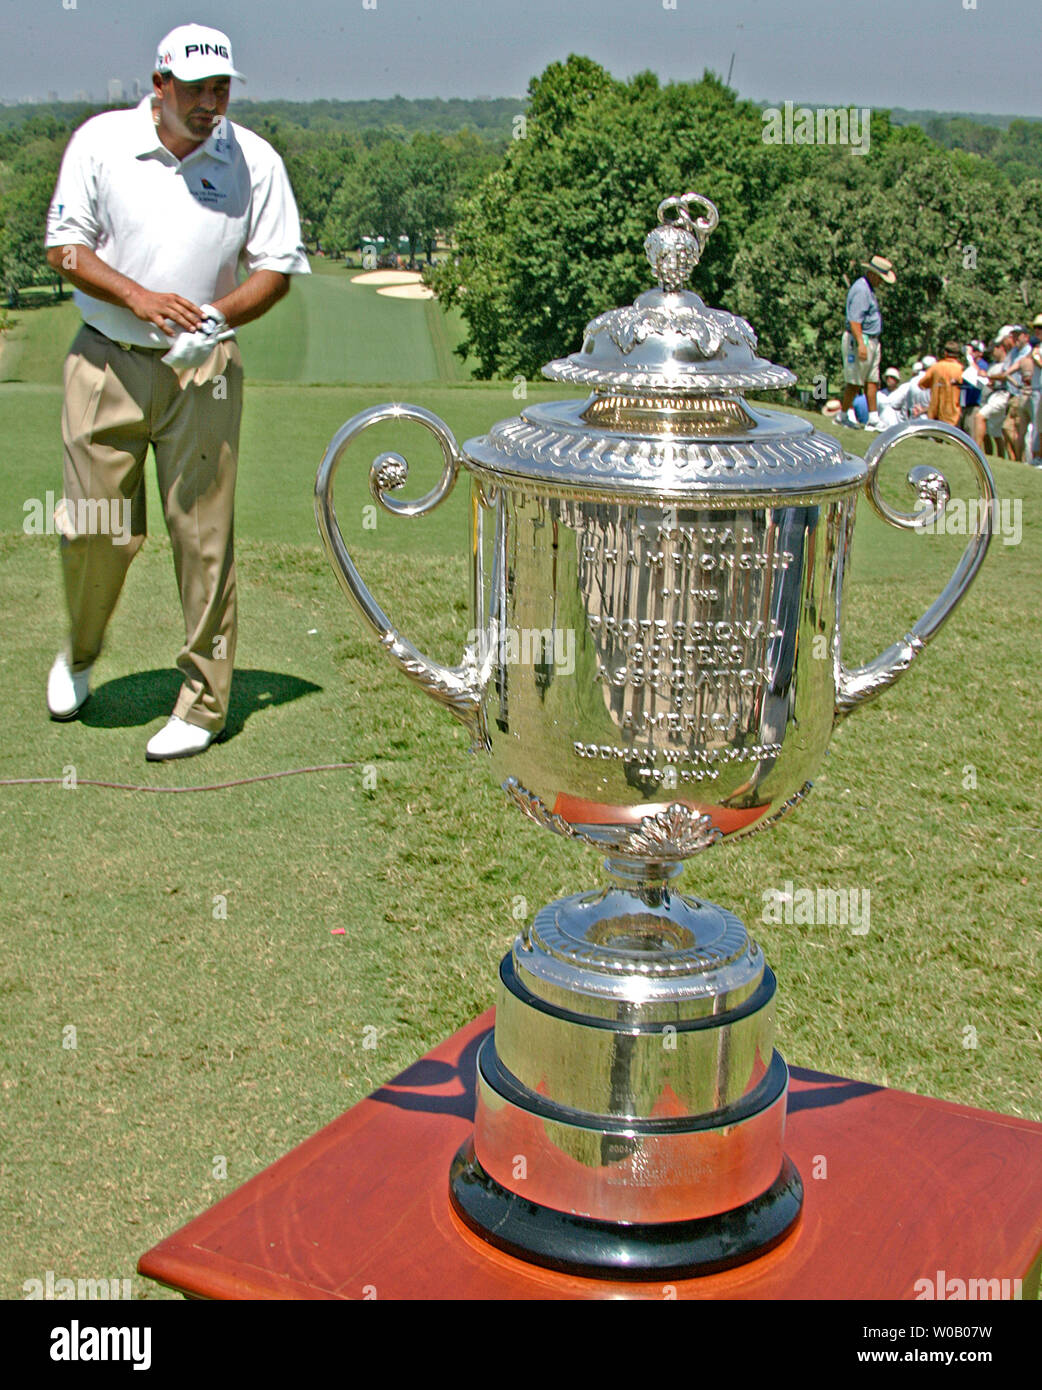 U.S. Open winner Angel Cabrera walks toward the Wanamaker trophy prior to beginning play in the first round at the 89th PGA Championship at Southern Hills Country Club in Tulsa, Oklahoma on August 9, 2007.   (UPI Photo/Gary C. Caskey Stock Photo